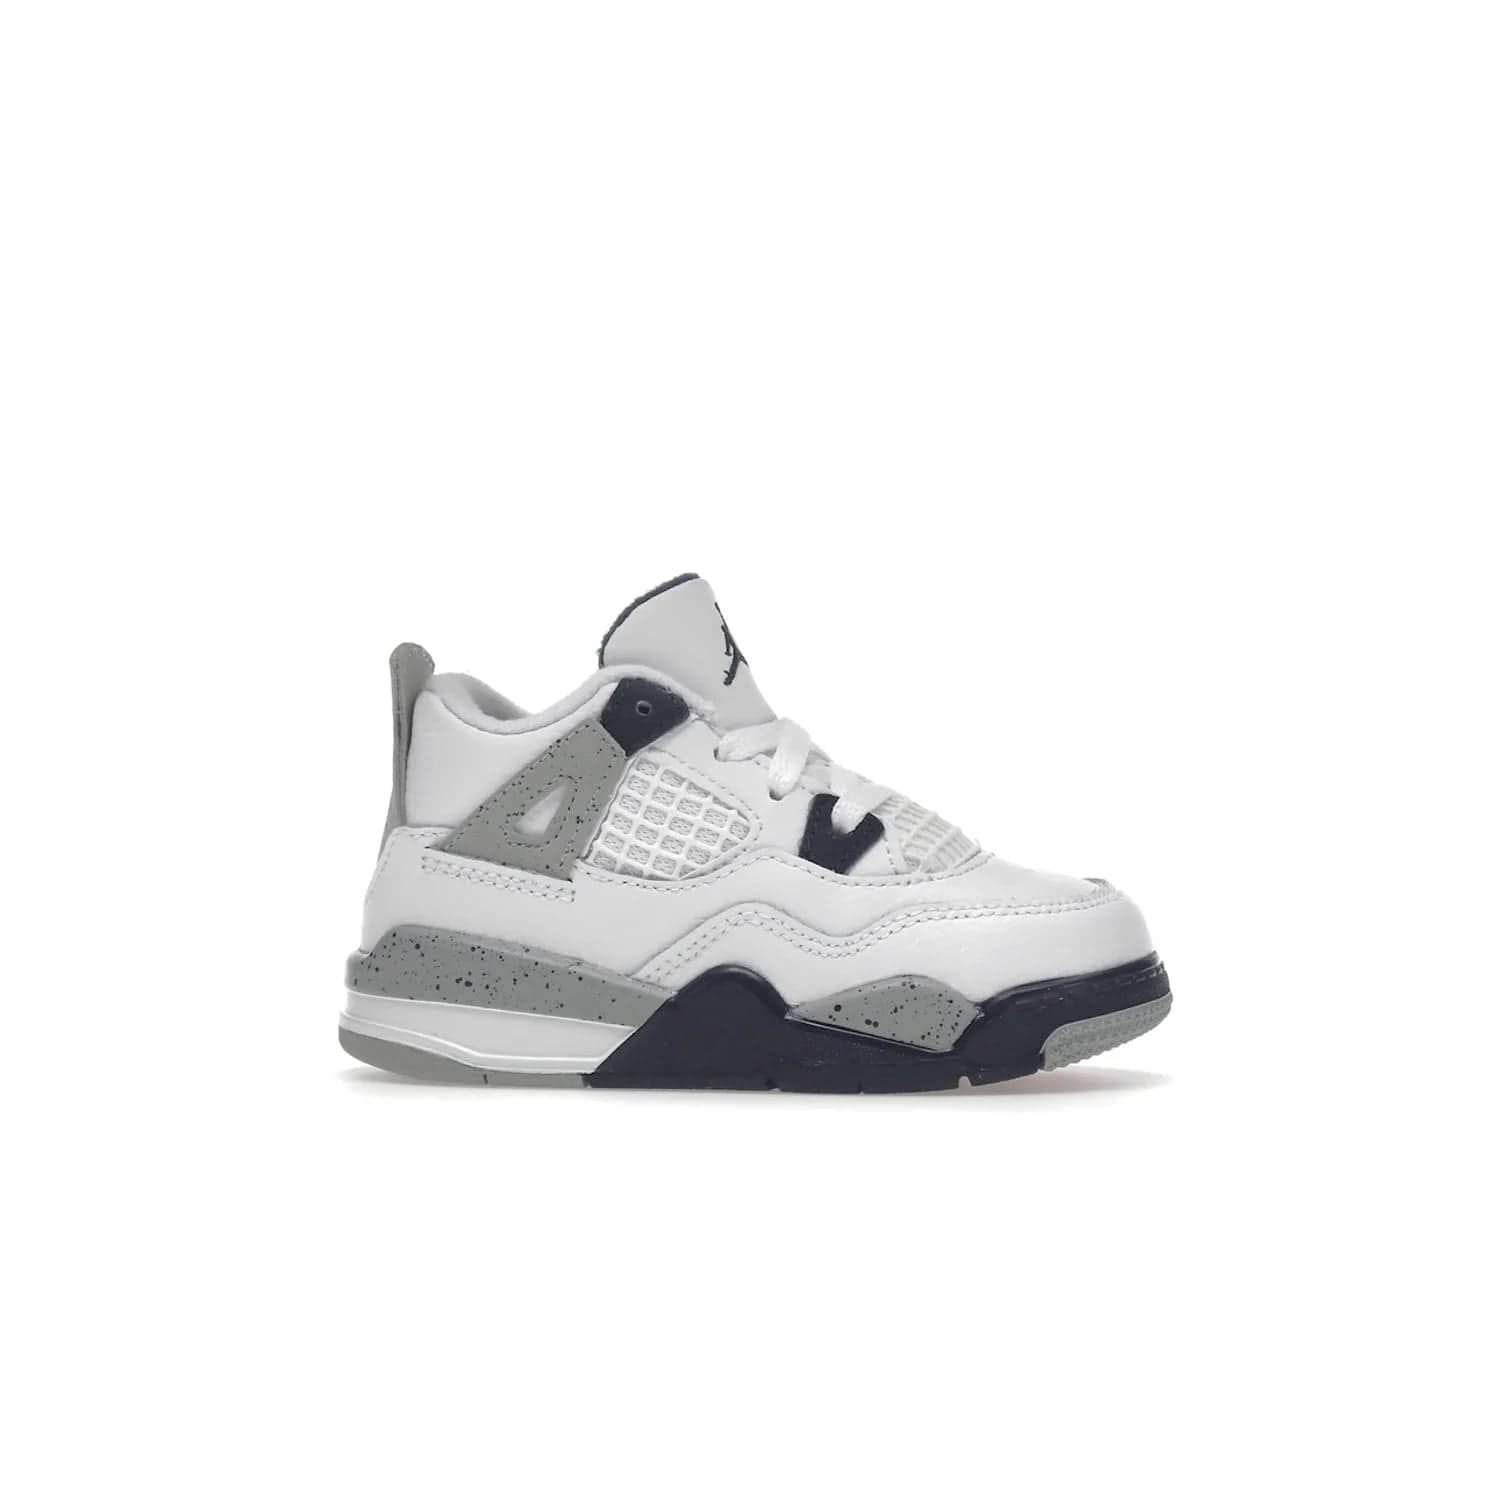 Jordan 4 Retro Midnight Navy (TD) - Image 2 - Only at www.BallersClubKickz.com - Introducing the Jordan 4 Retro Midnight Navy (TD) for kids. White leather upper with navy and grey accents plus fire red detailing. Perfect for everyday wear. Get yours before they sell out.